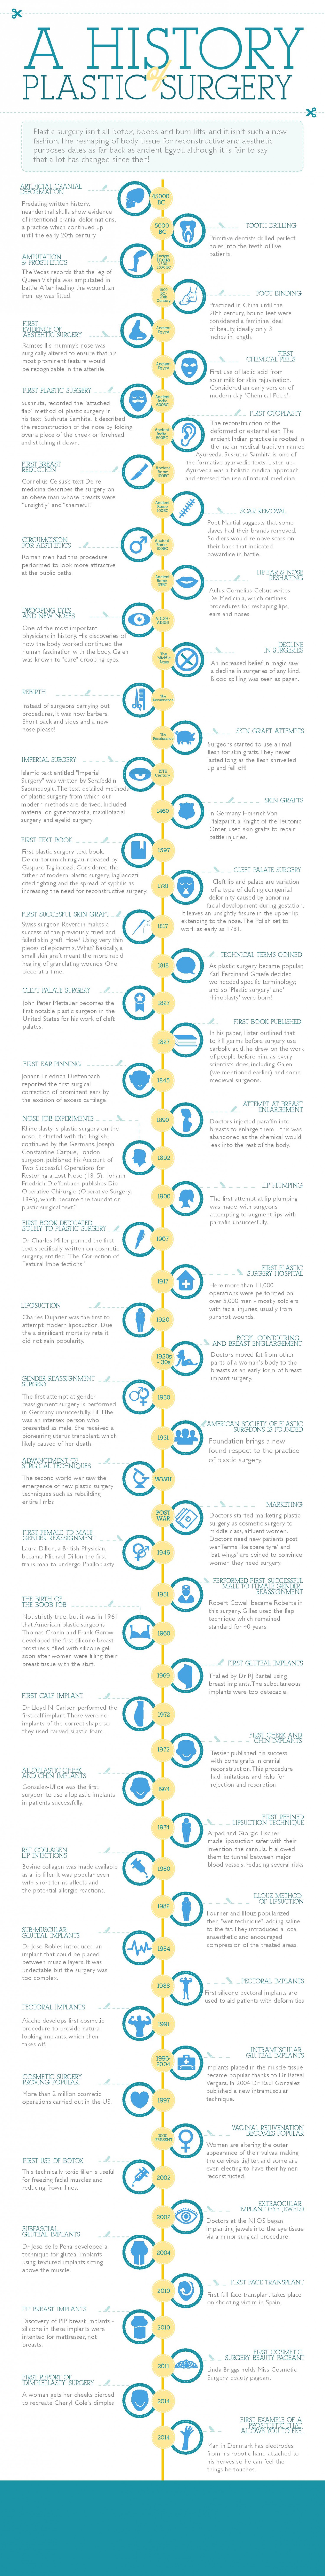 60 Major Developments in Cosmetic Surgery Infographic